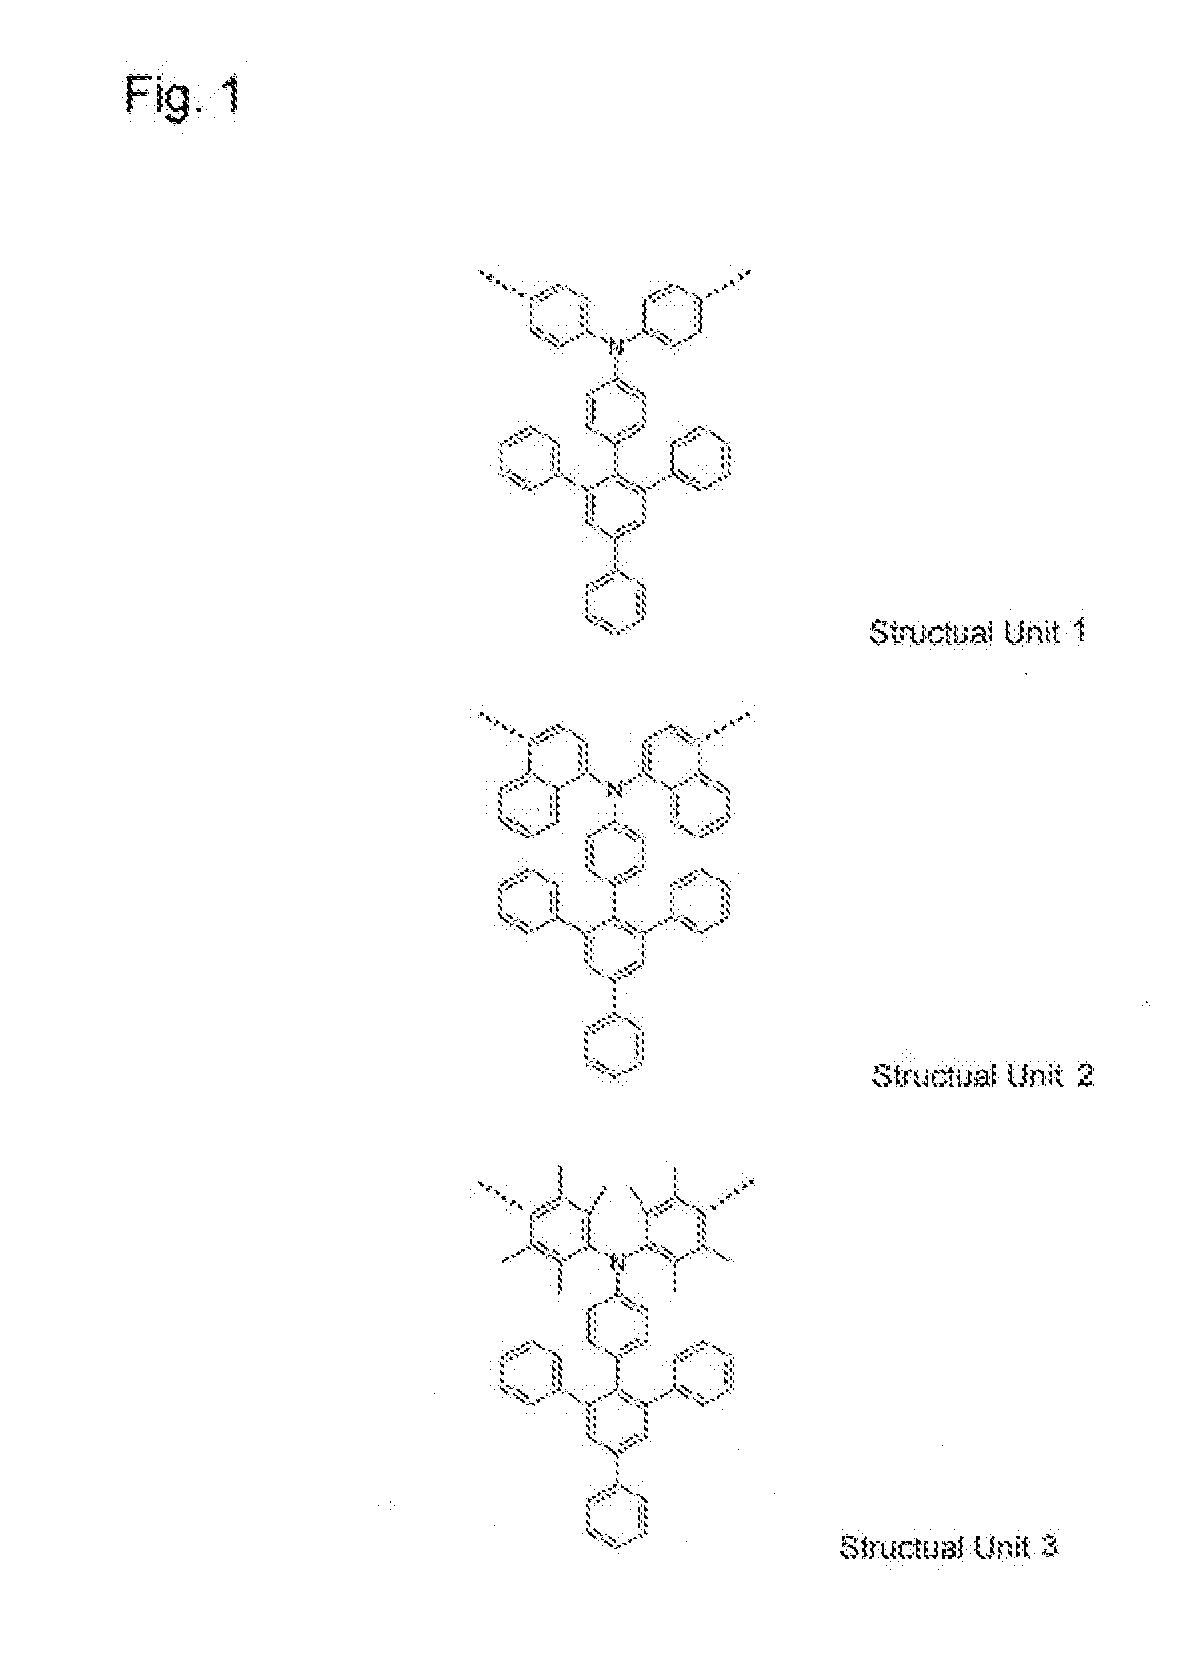 High molecular weight compound containing substituted triarylamine structural unit